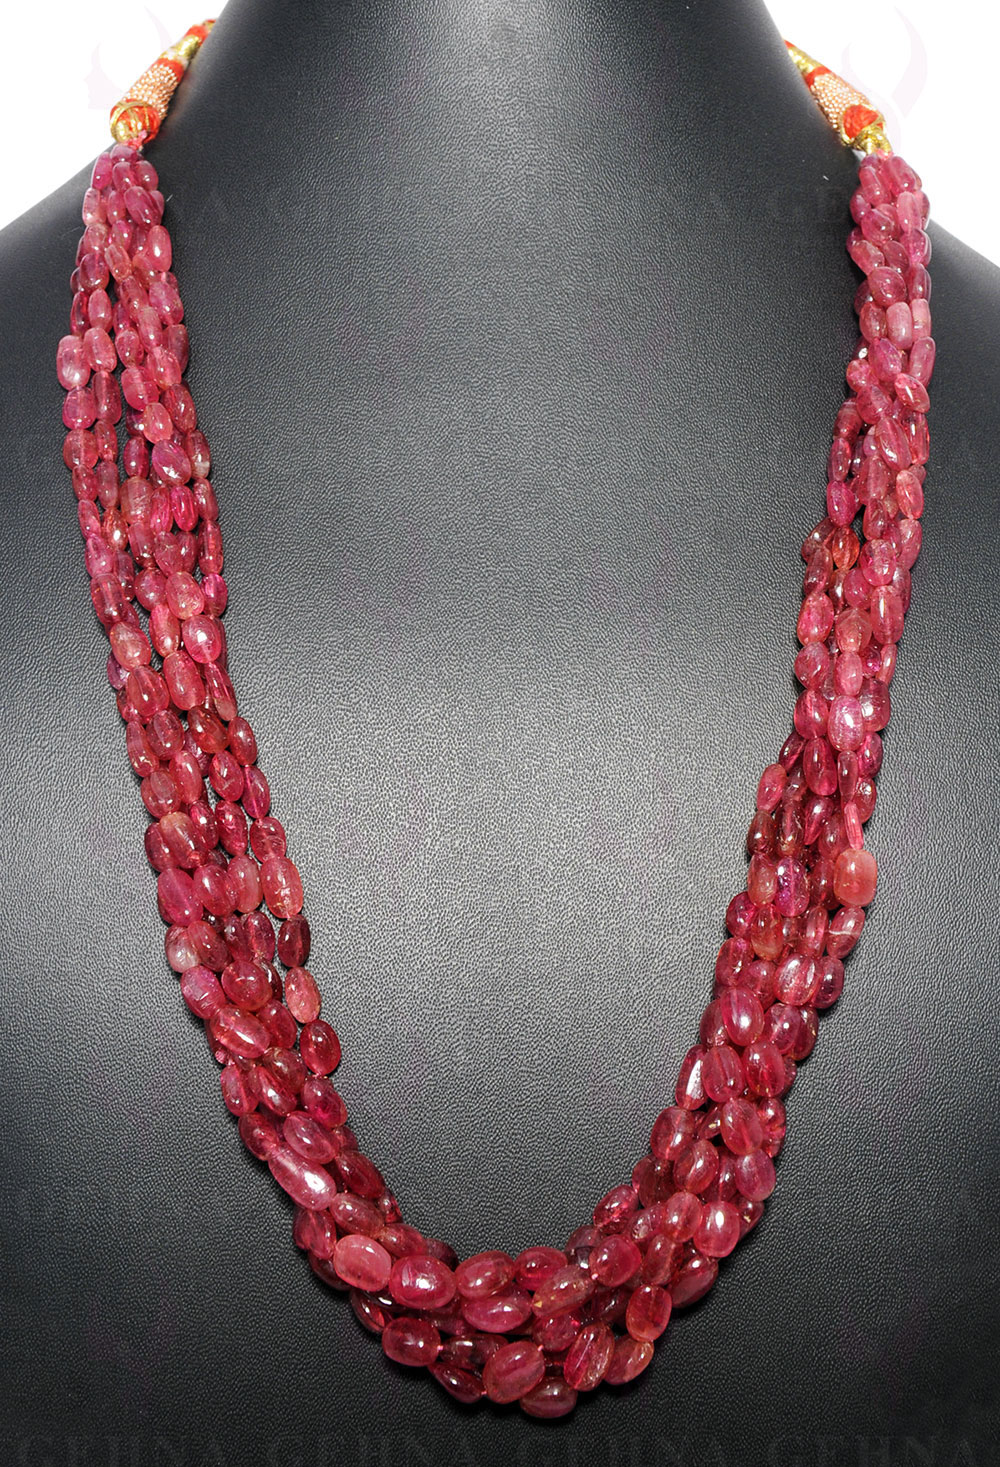 6 Rows of Pink Tourmaline gemstone Twisted Beads Necklace NS-1573